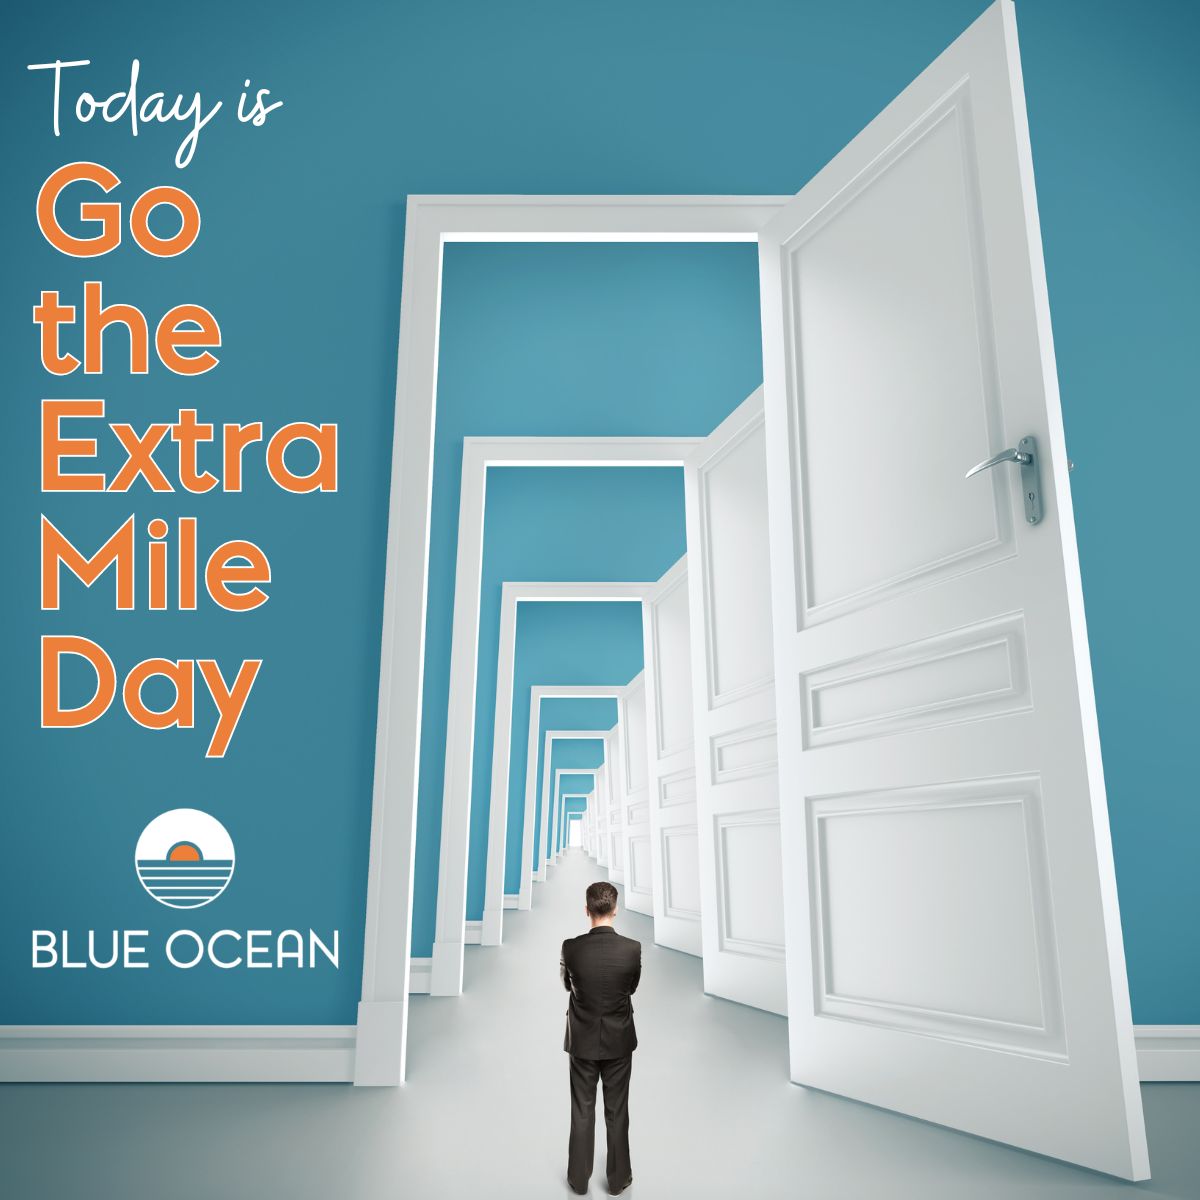 Today is Go the Extra Mile Day!
 
We are proud of the work we do in going the EXTRA MILE for our partners to help them OPEN DOORS to NEW BUSINESS. We do this by raising awareness of our SAFER & more SUSTAINABLE... linkedin.com/feed/update/ur…
 
#GoTheExtraMile
#OpenDoors #DitchTheDrum